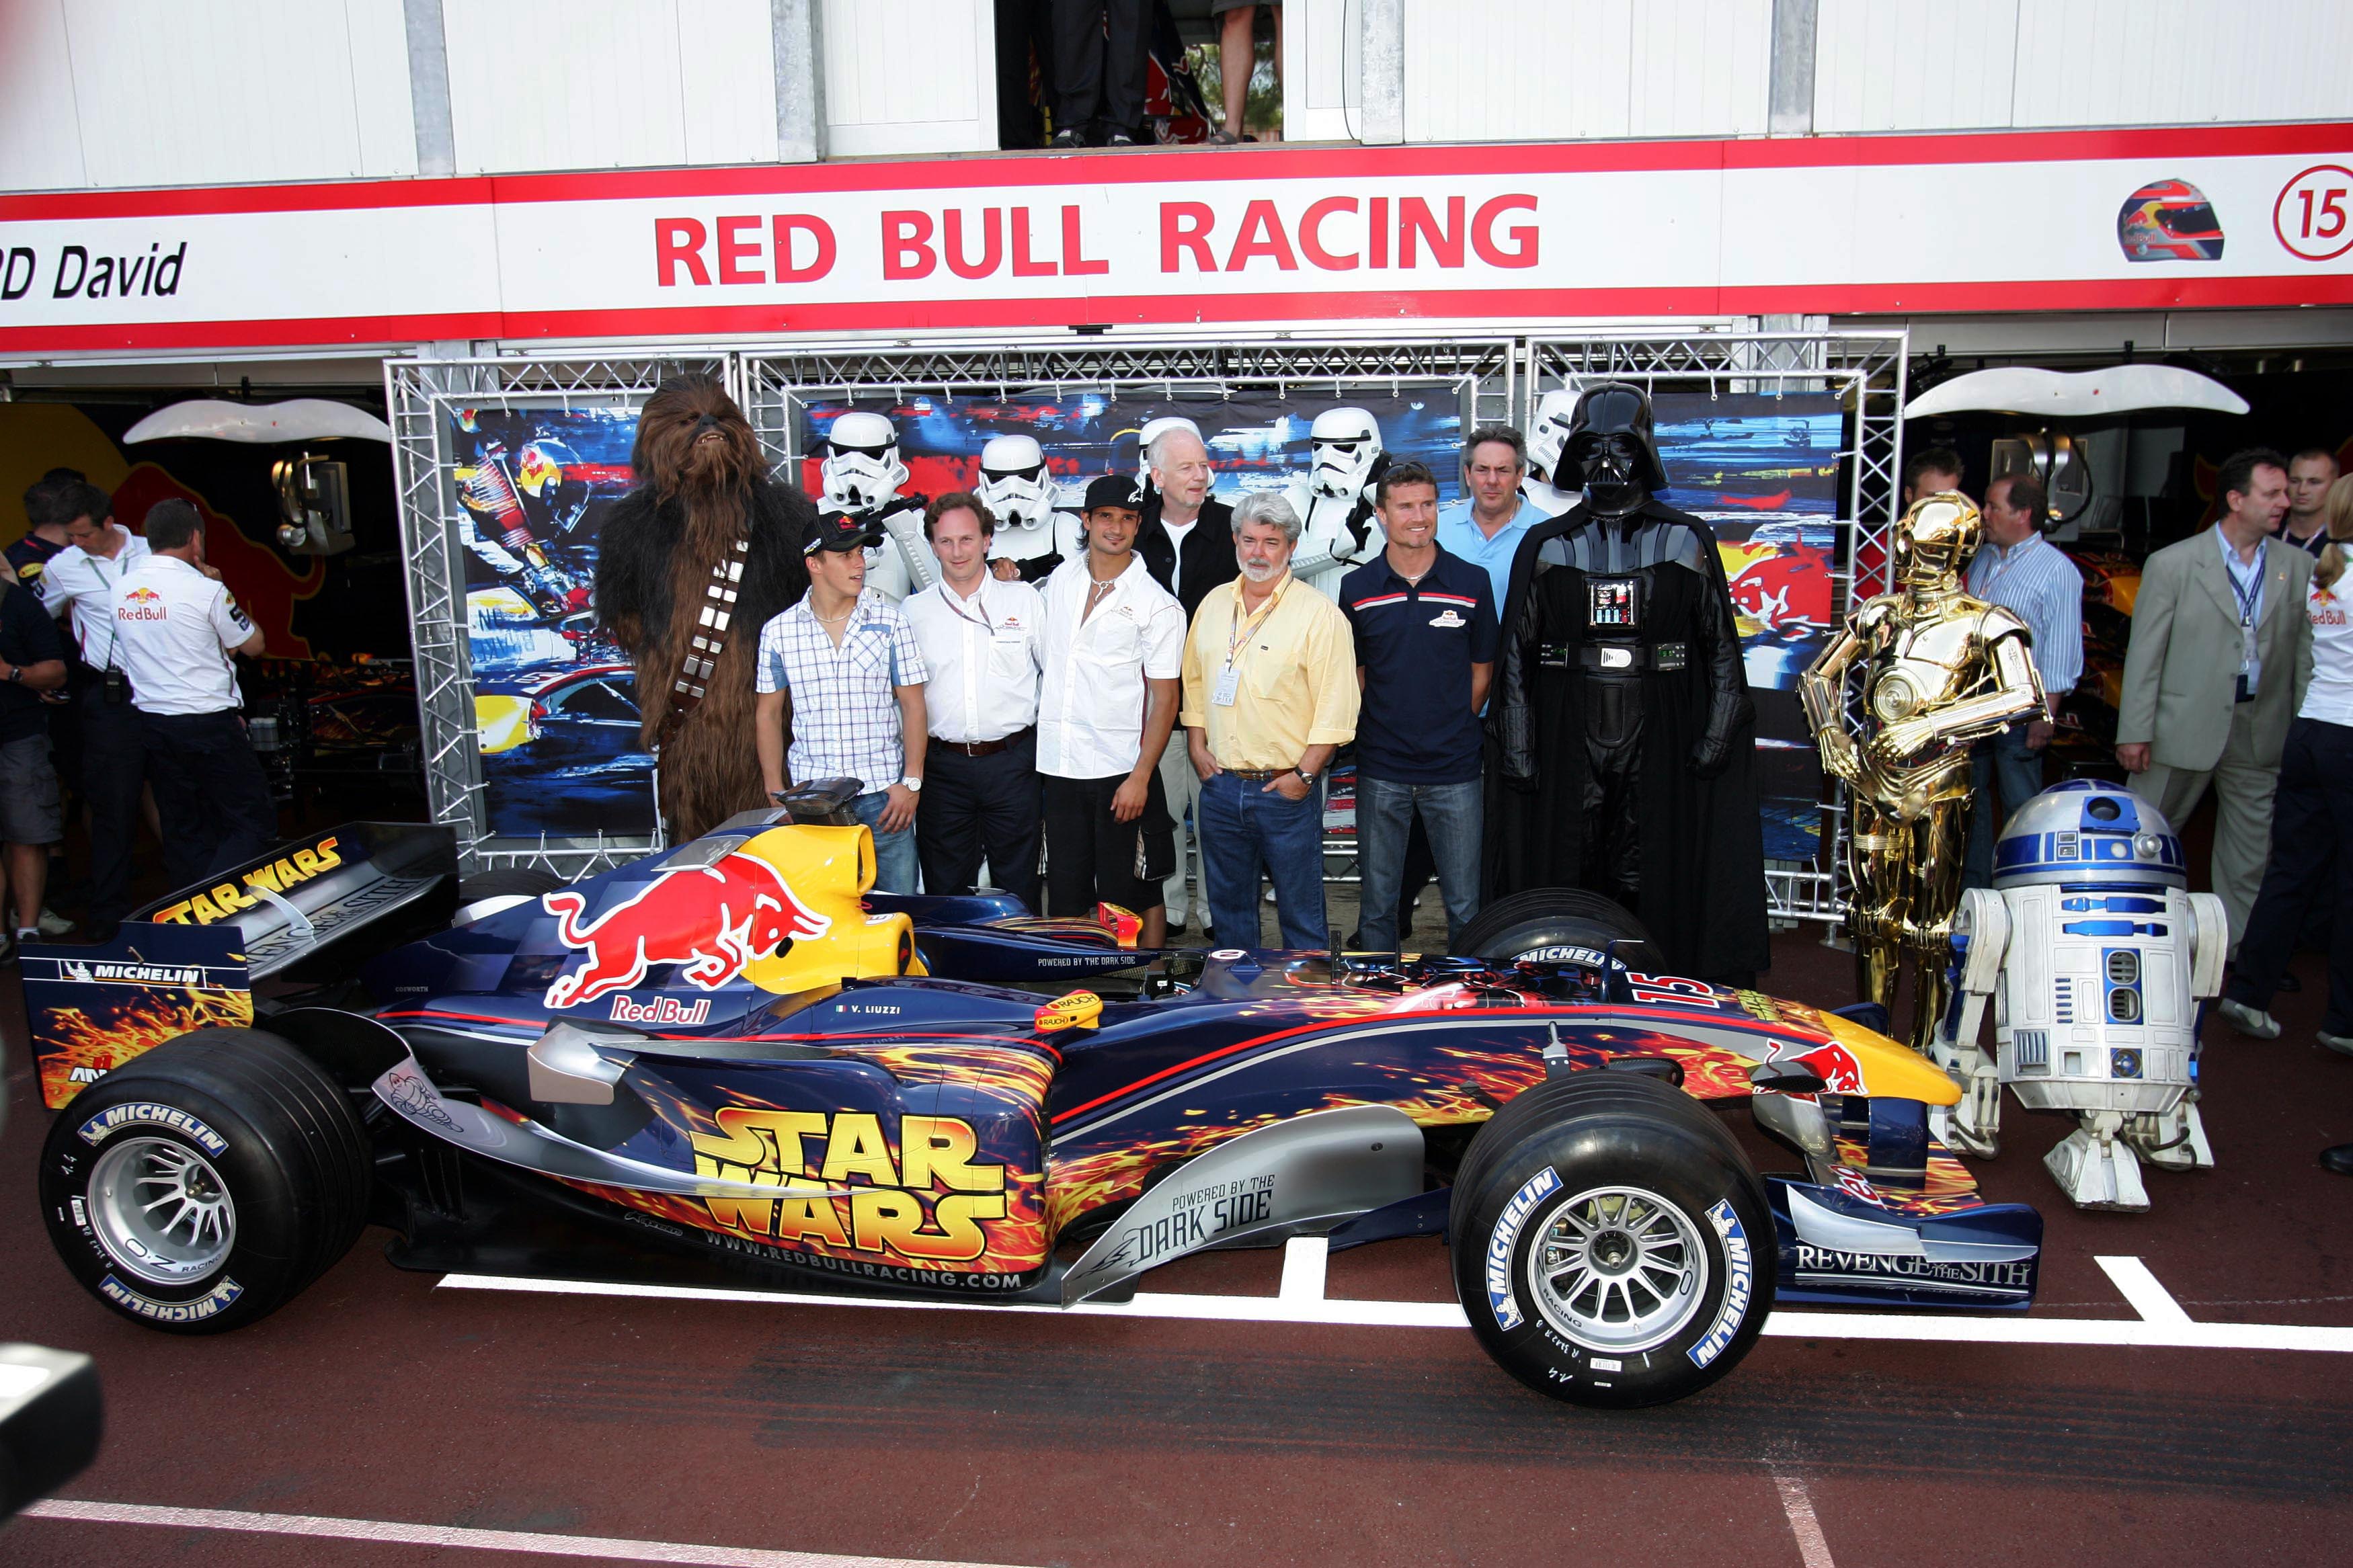 From Star Wars to Camobull: Five of Red Bull's best one-off F1 liveries